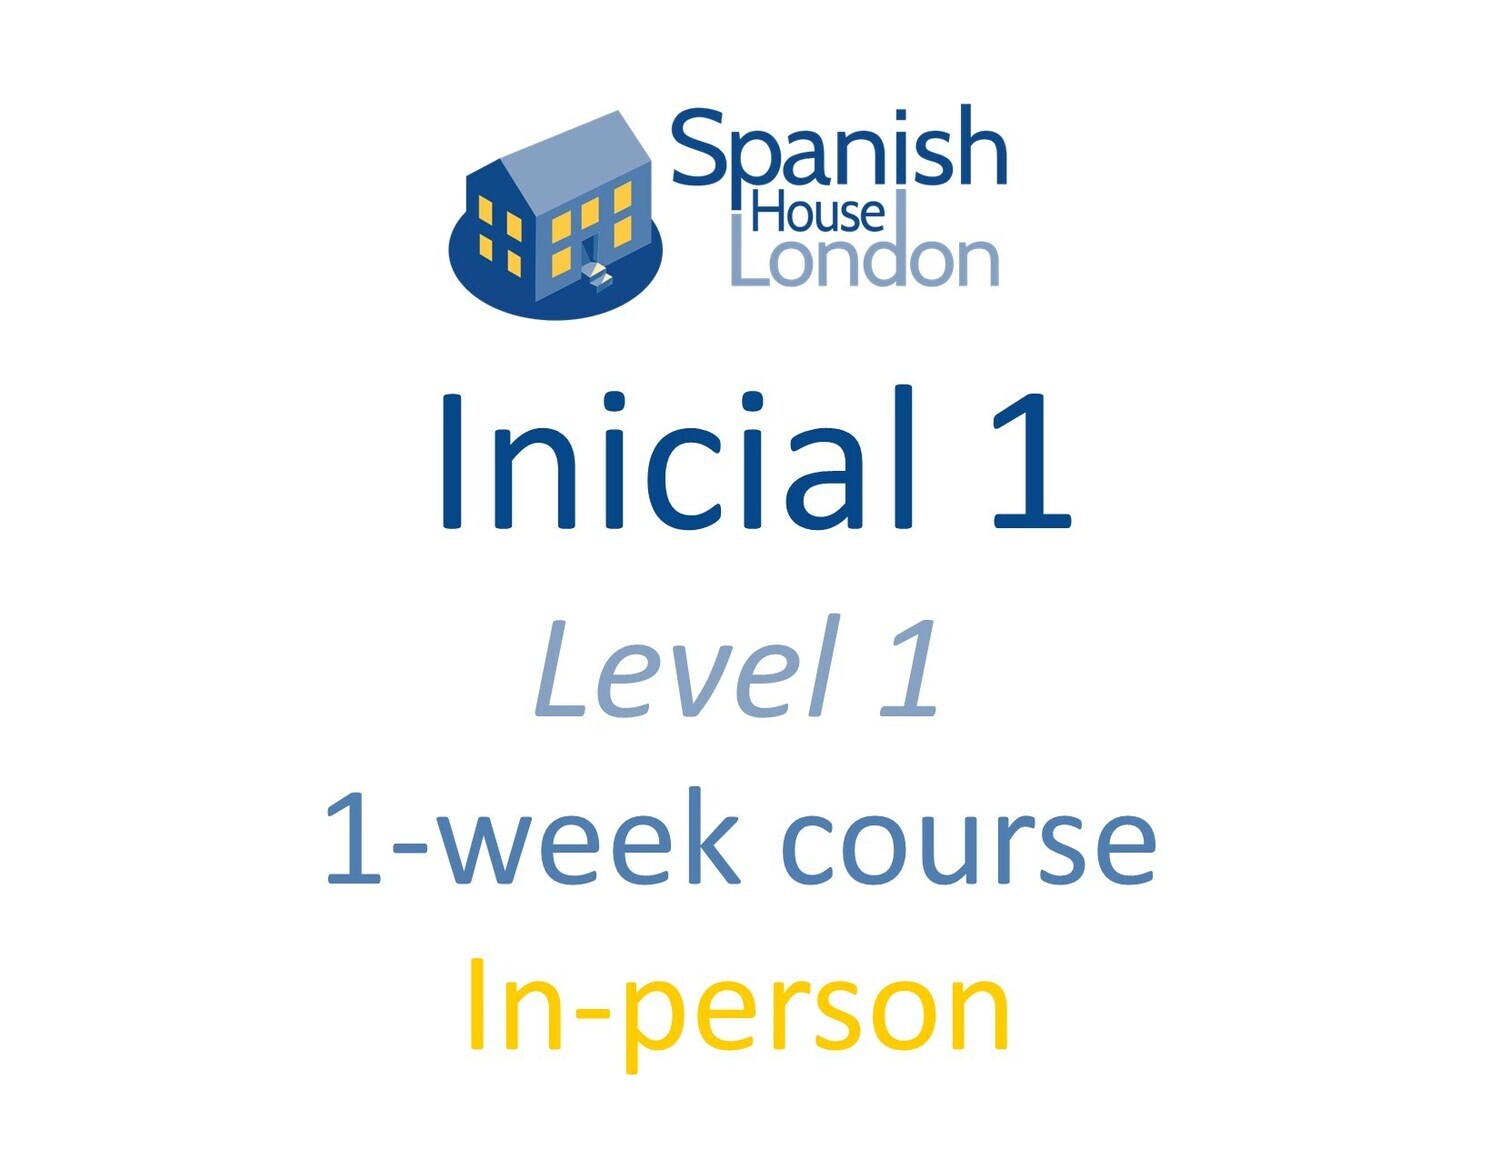 One-Week Intensive Inicial 1 Course starting on 5th June at 10.30am in Clapham North